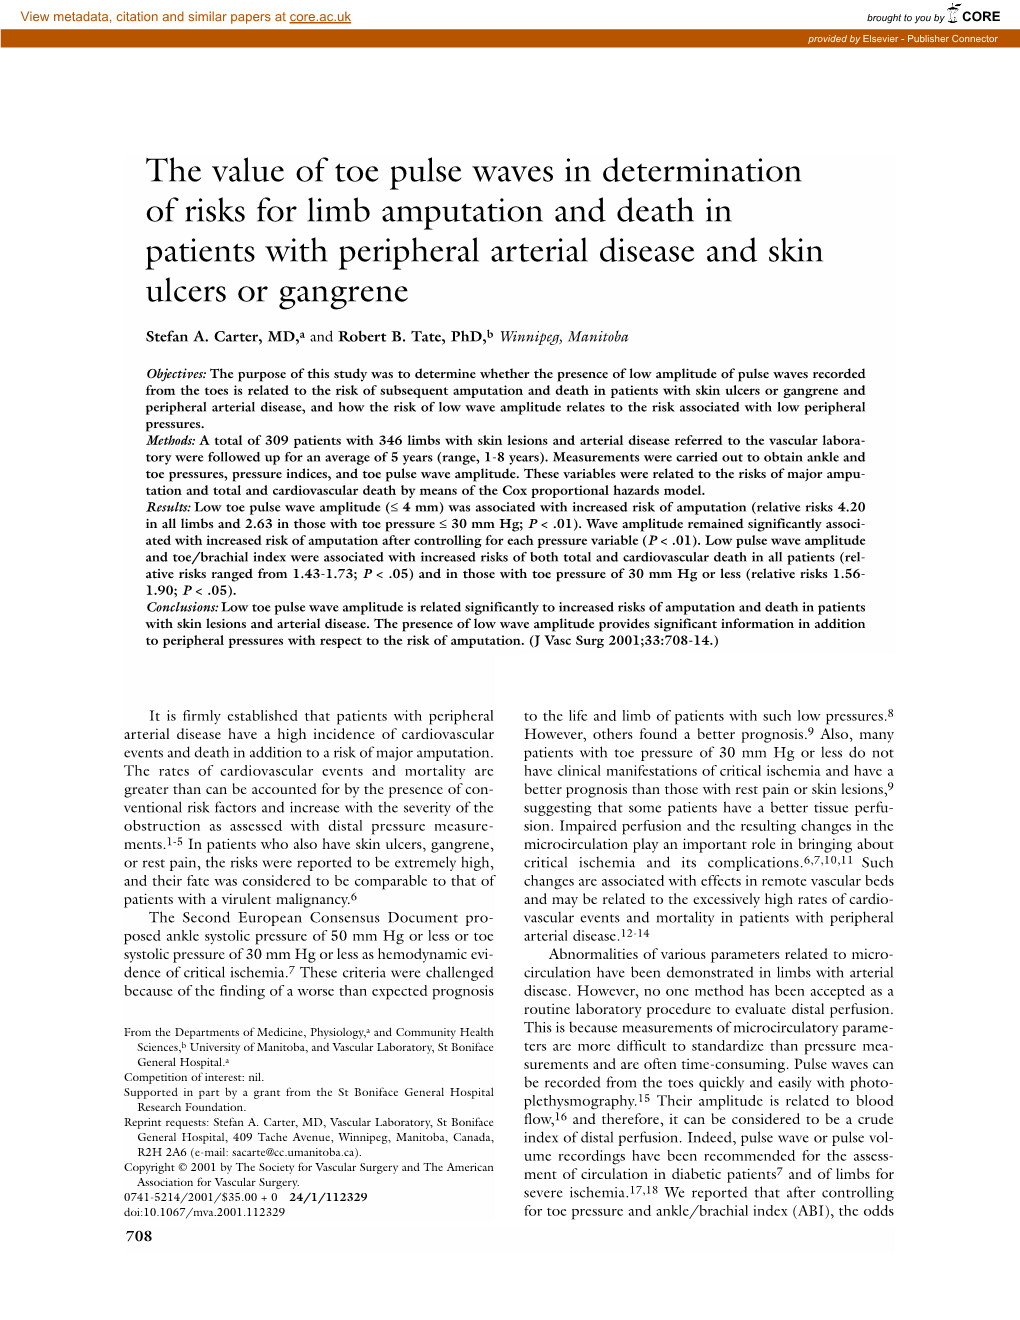 The Value of Toe Pulse Waves in Determination of Risks for Limb Amputation and Death in Patients with Peripheral Arterial Disease and Skin Ulcers Or Gangrene